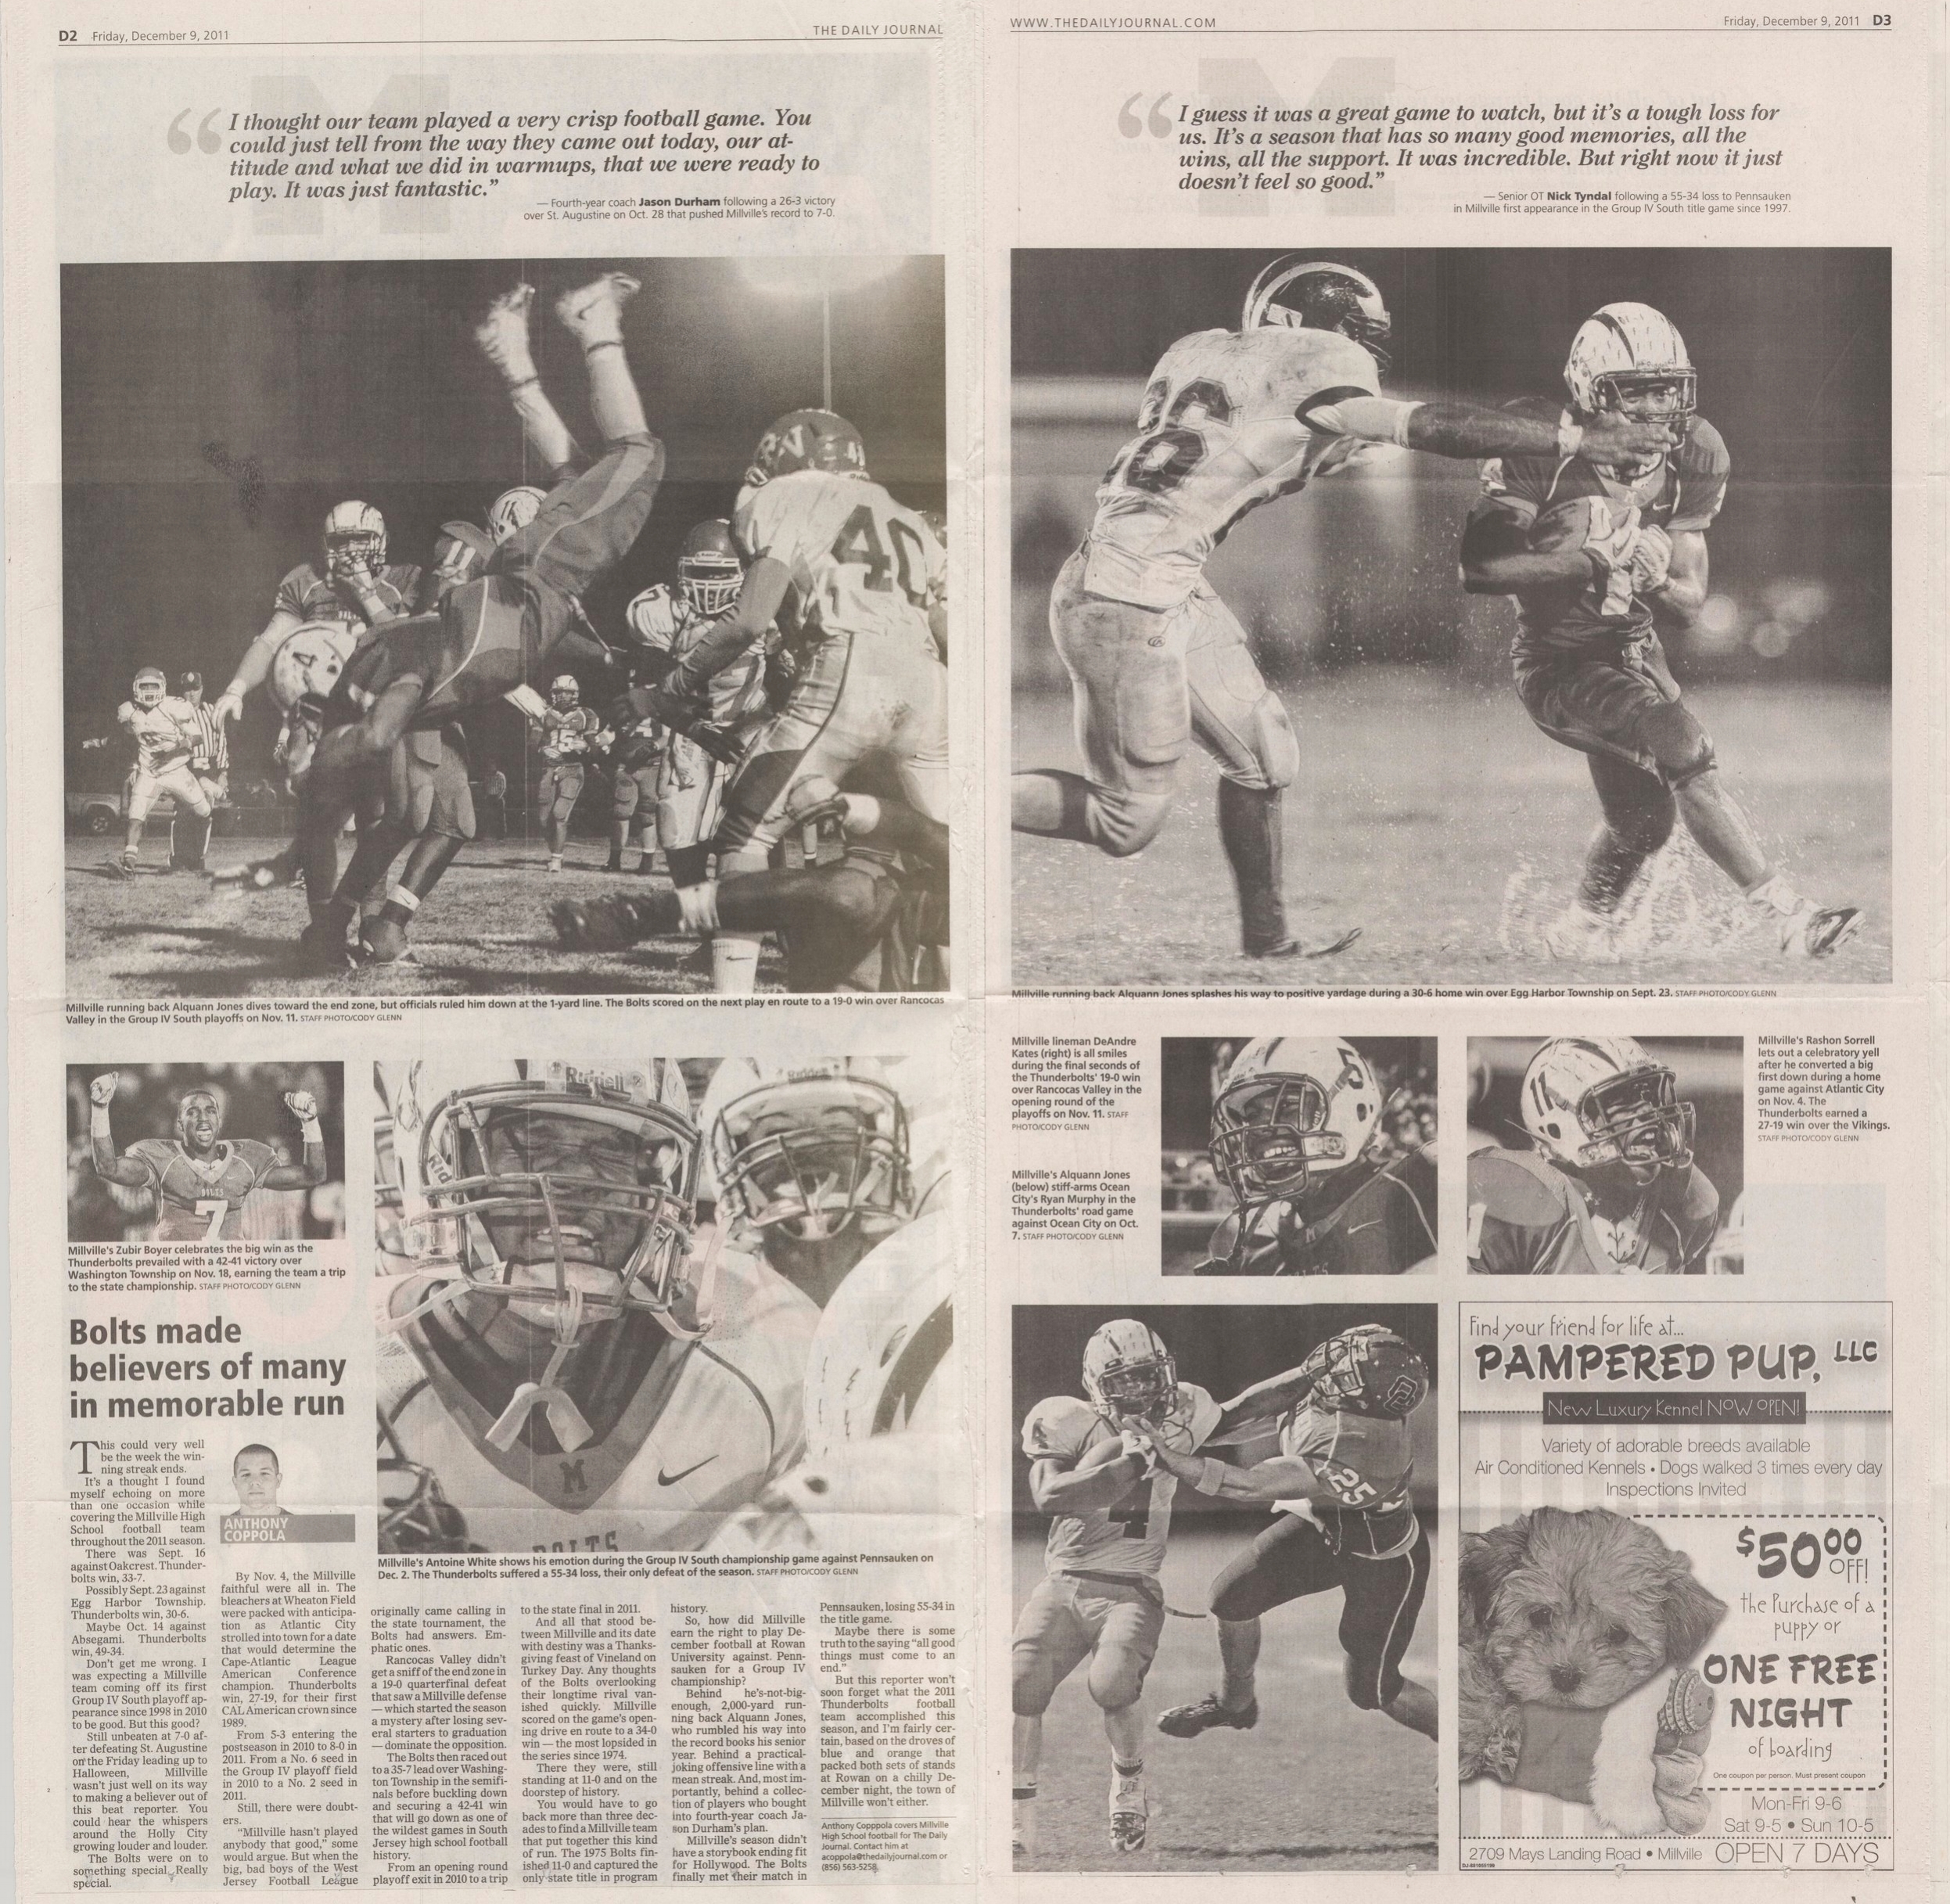  Millville Thunderbolts Football 2011 Season Special Supplement /  The Daily Journal  